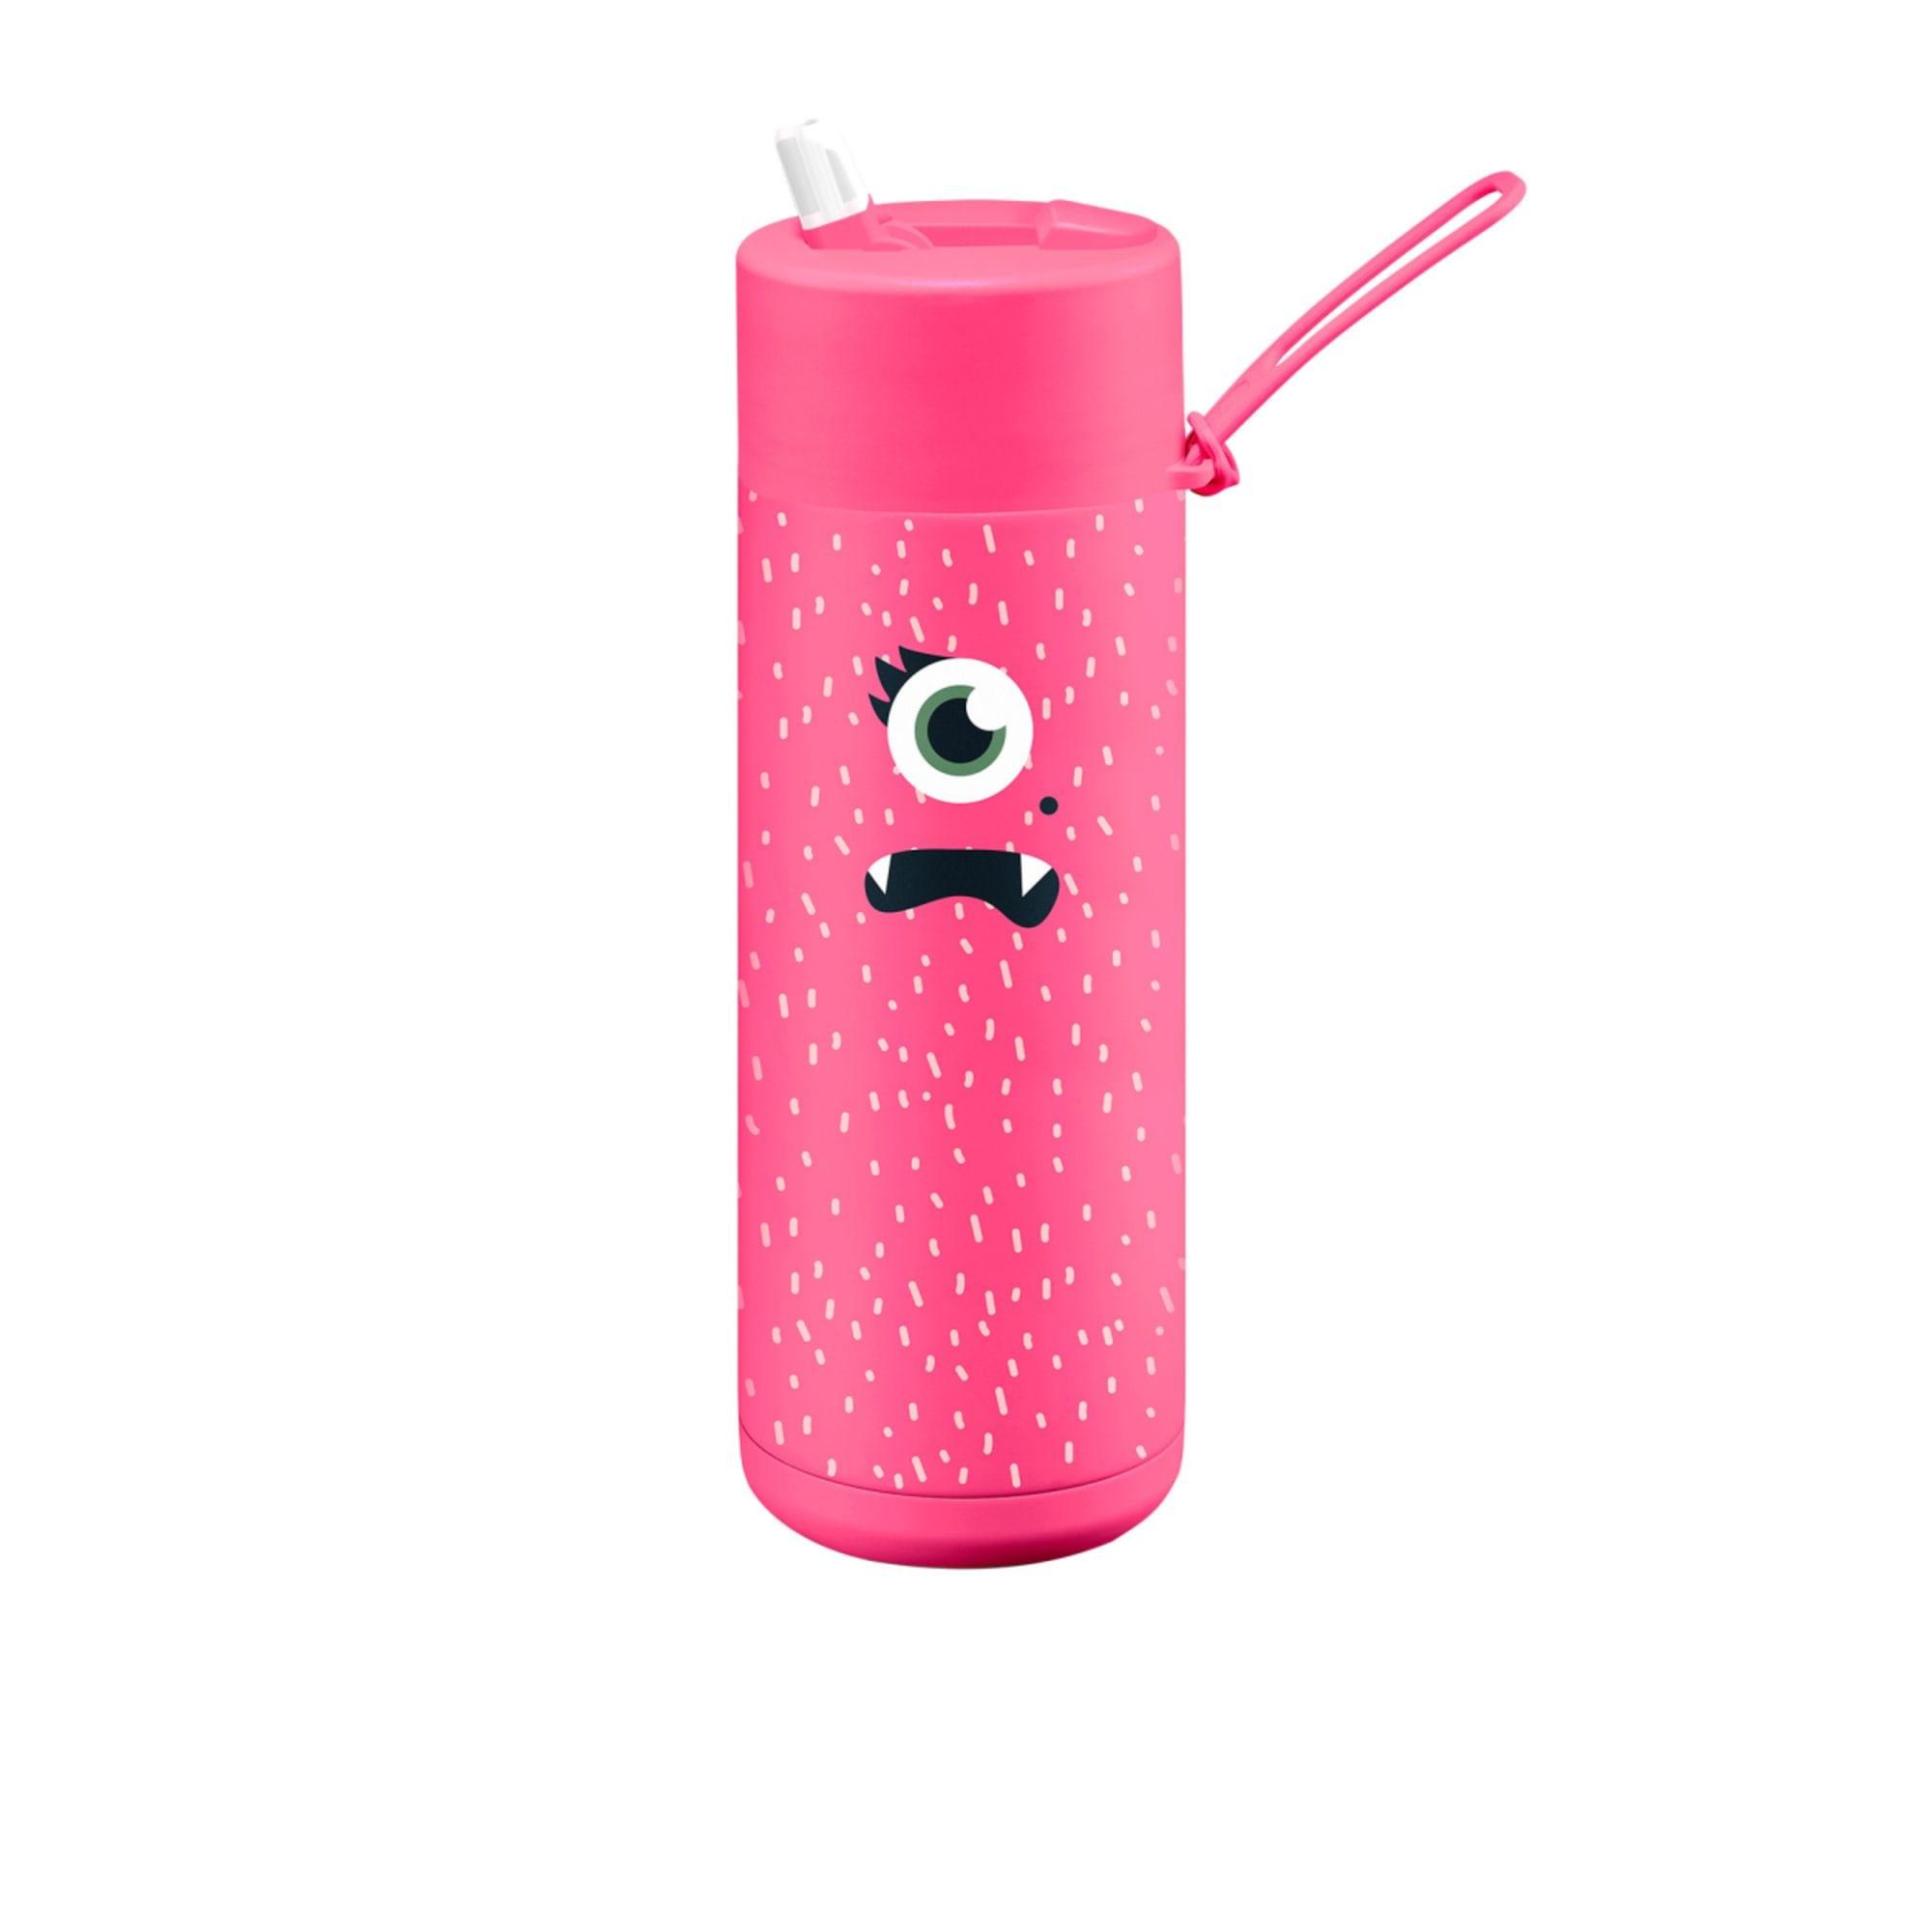 Frank Green Franksters Reusable Bottle with Straw 595ml (20oz) Neon Pink Piper Image 1